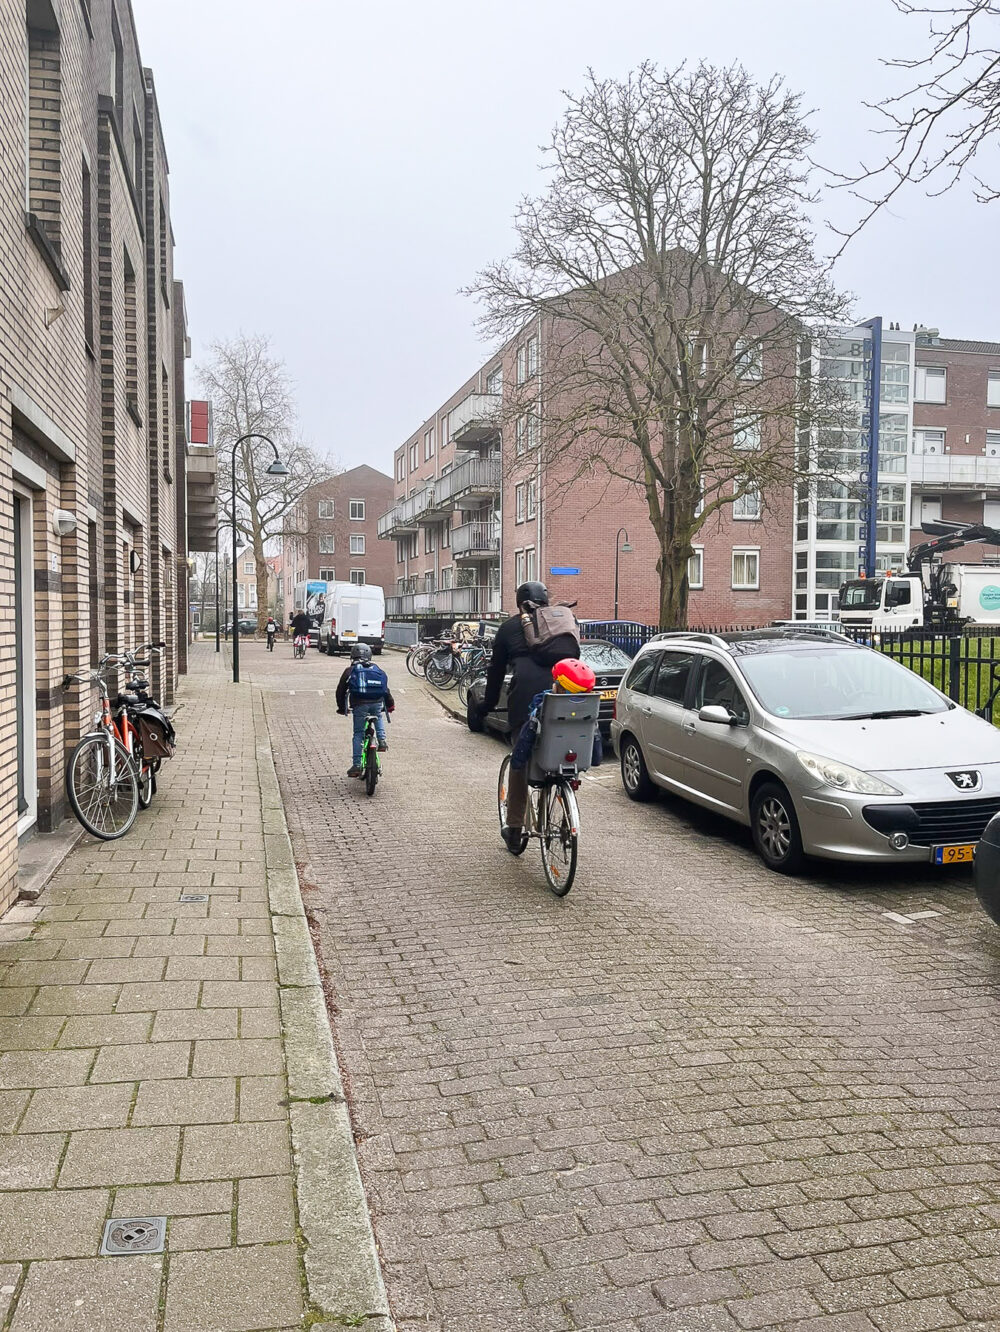 Car-free transportation for families